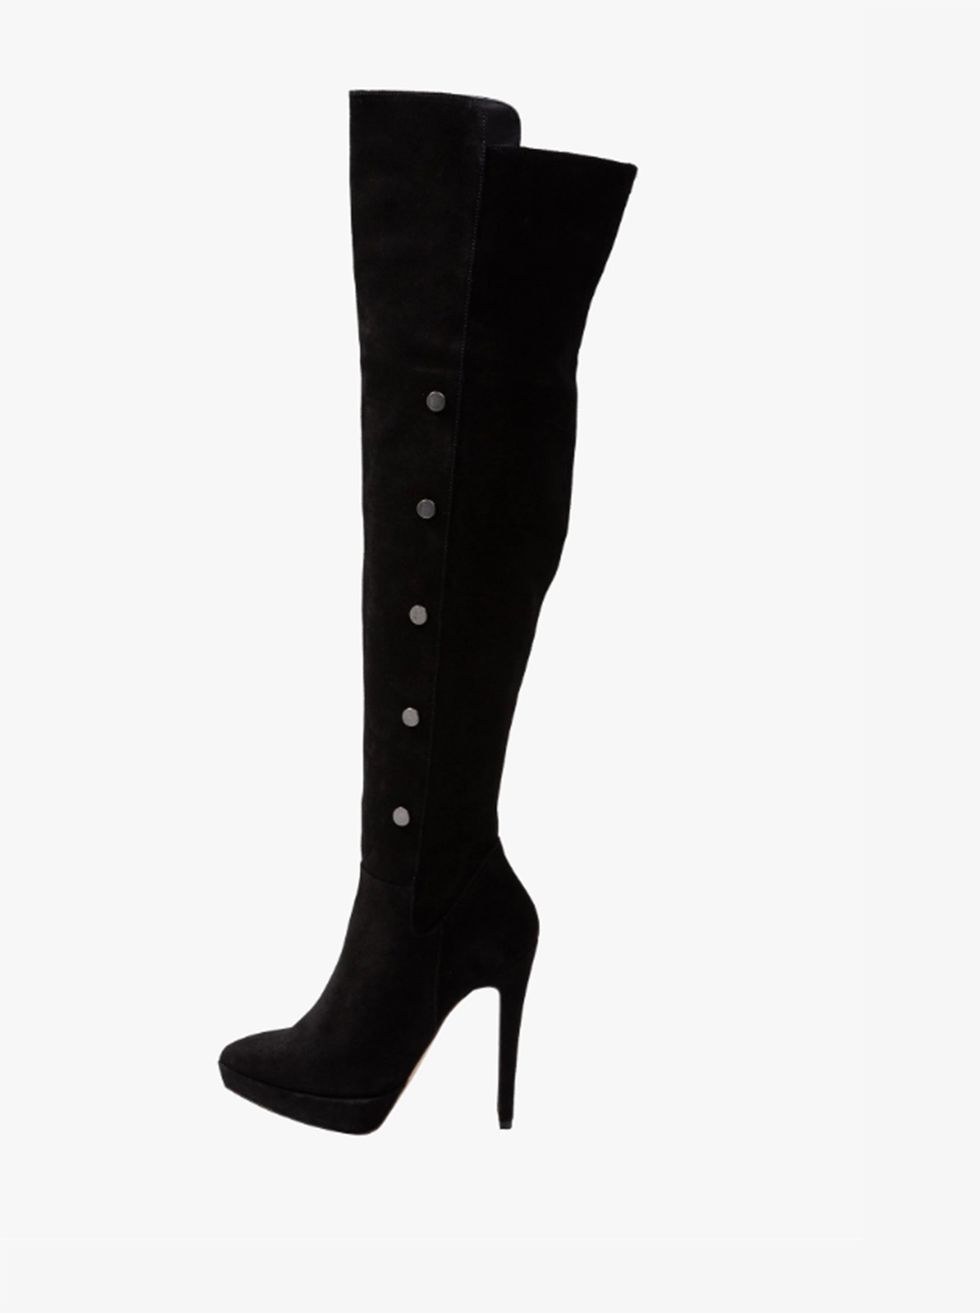 Footwear, Boot, High heels, Knee-high boot, Shoe, Leg, Leather, Suede, Riding boot, 